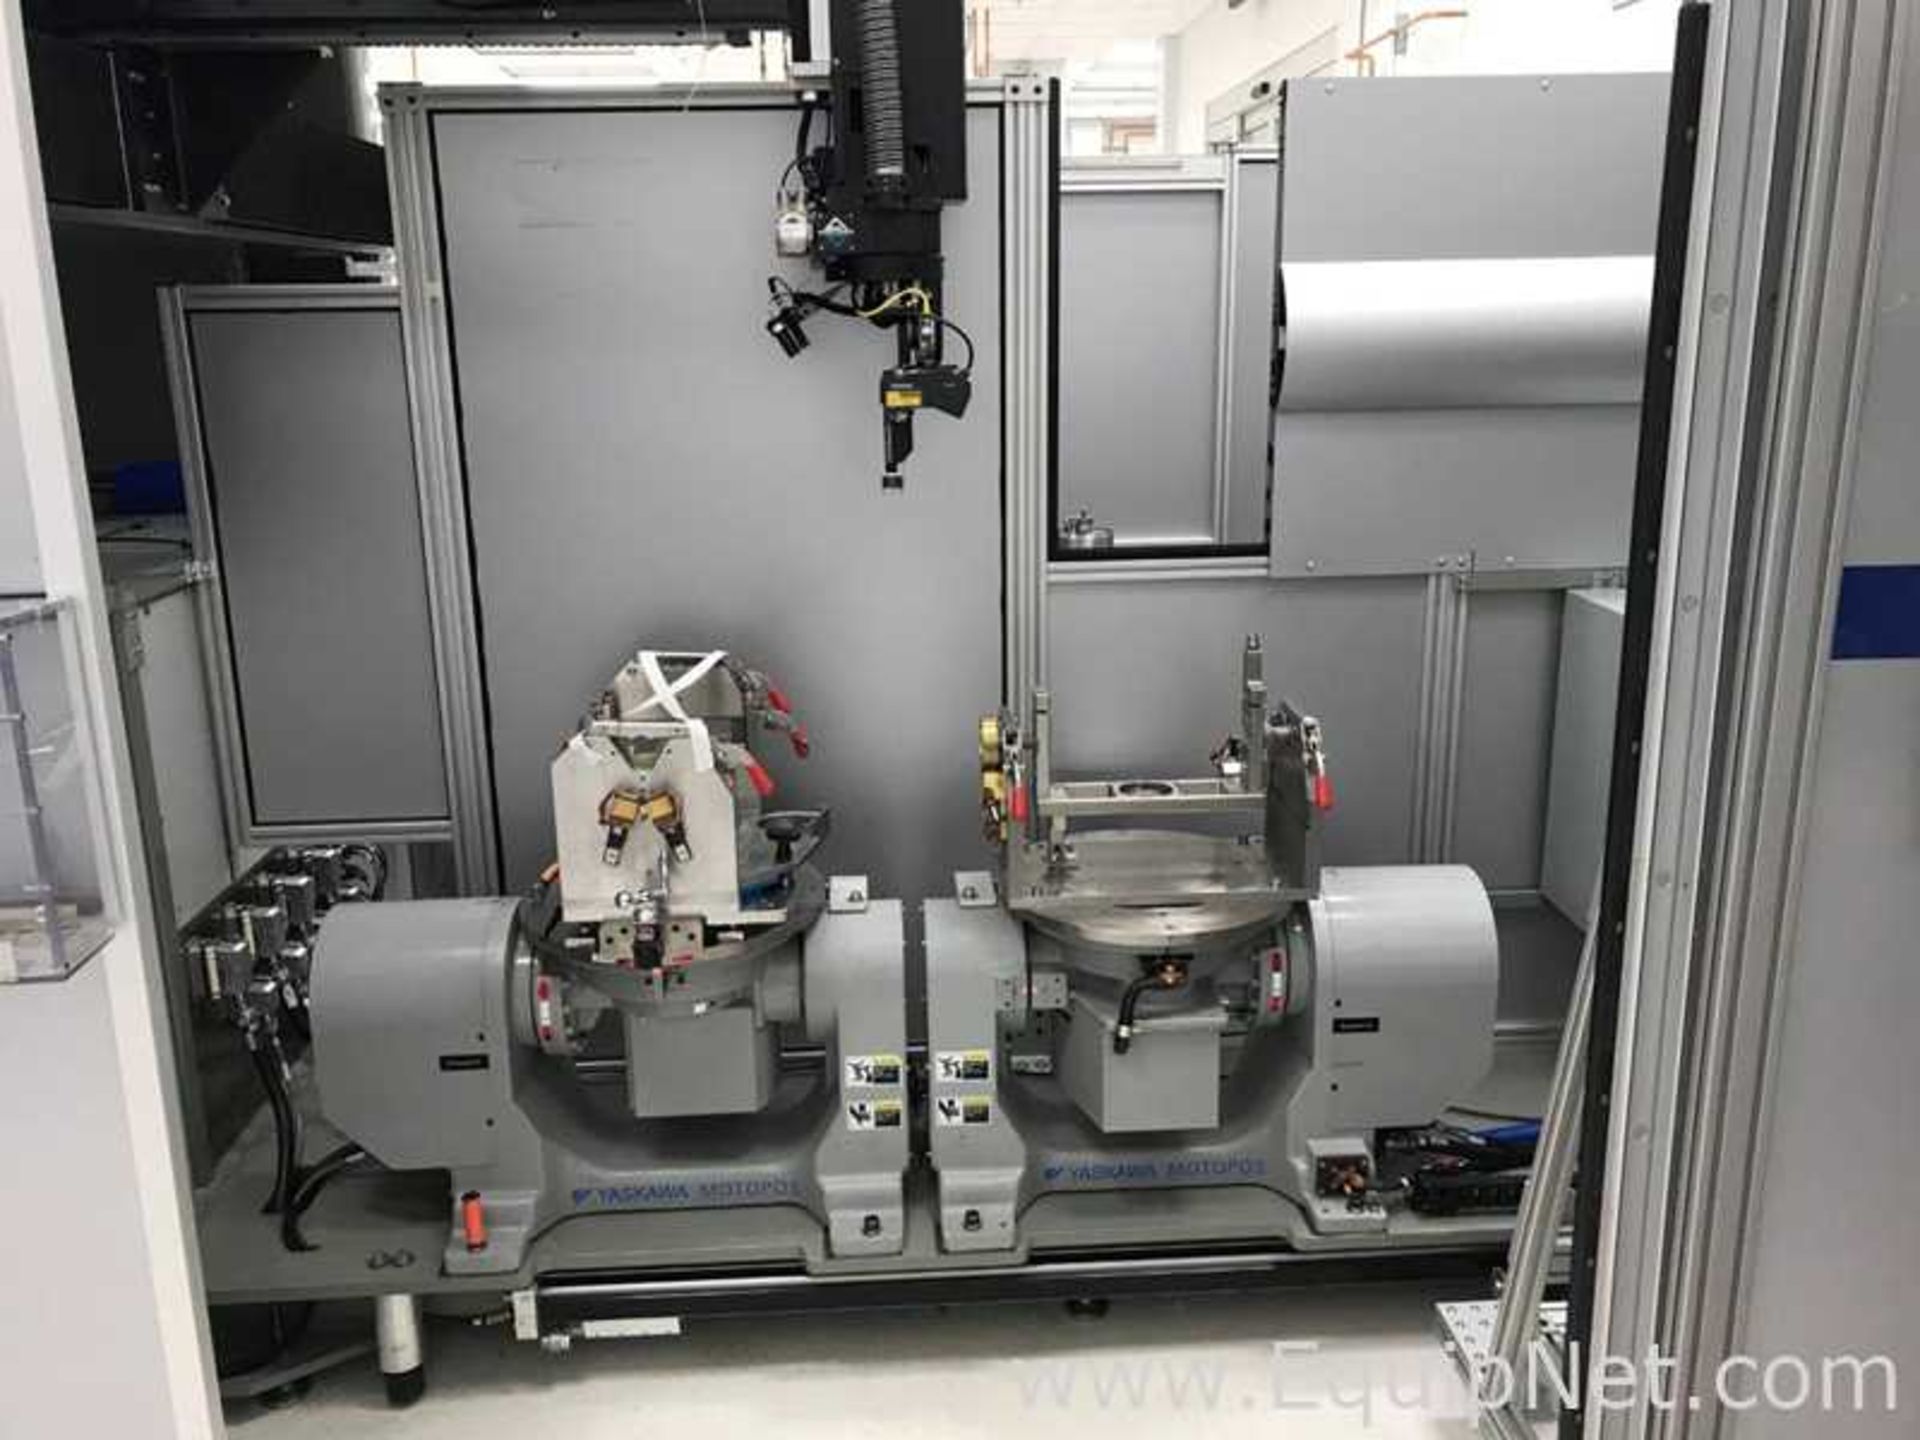 Liburdi Automation Laws 5000 Multi Axis Tig Welding Cell with 4 Yaskawa Robotic Positioners - Image 7 of 13